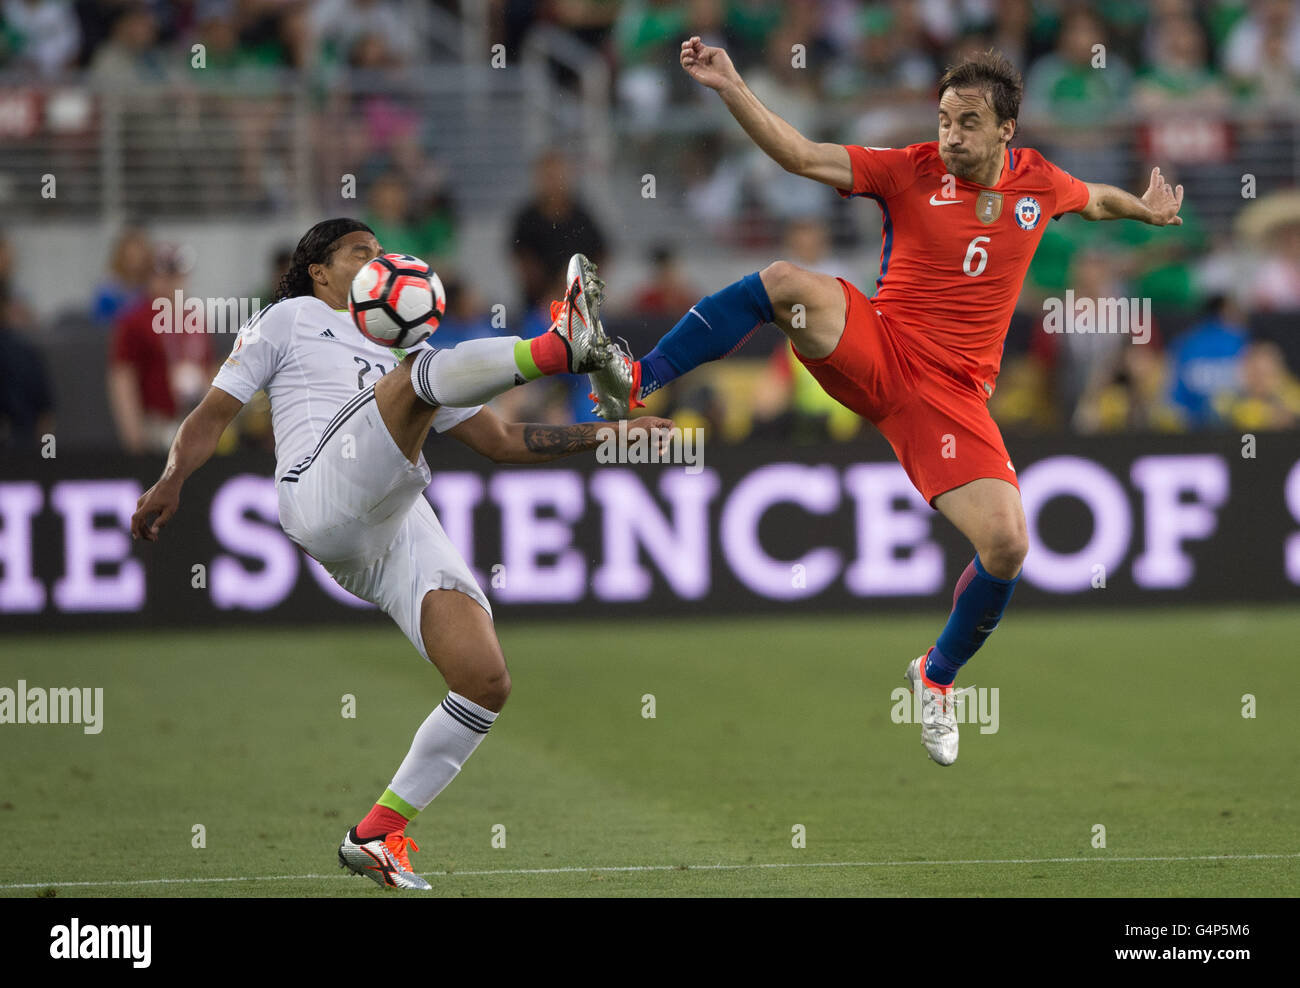 Santa Clara, USA. 18th June, 2016. Jos¨¦ Pedro Fuenzalida (R) of Chile vies with Carlos Pena of Mexico during their quarterfinal match of 2016 Copa America soccer tournament at the Levi's Stadium in Santa Clara, California, the United States, June 18, 2016. Chile won 7-0. Credit:  Yang Lei/Xinhua/Alamy Live News Stock Photo